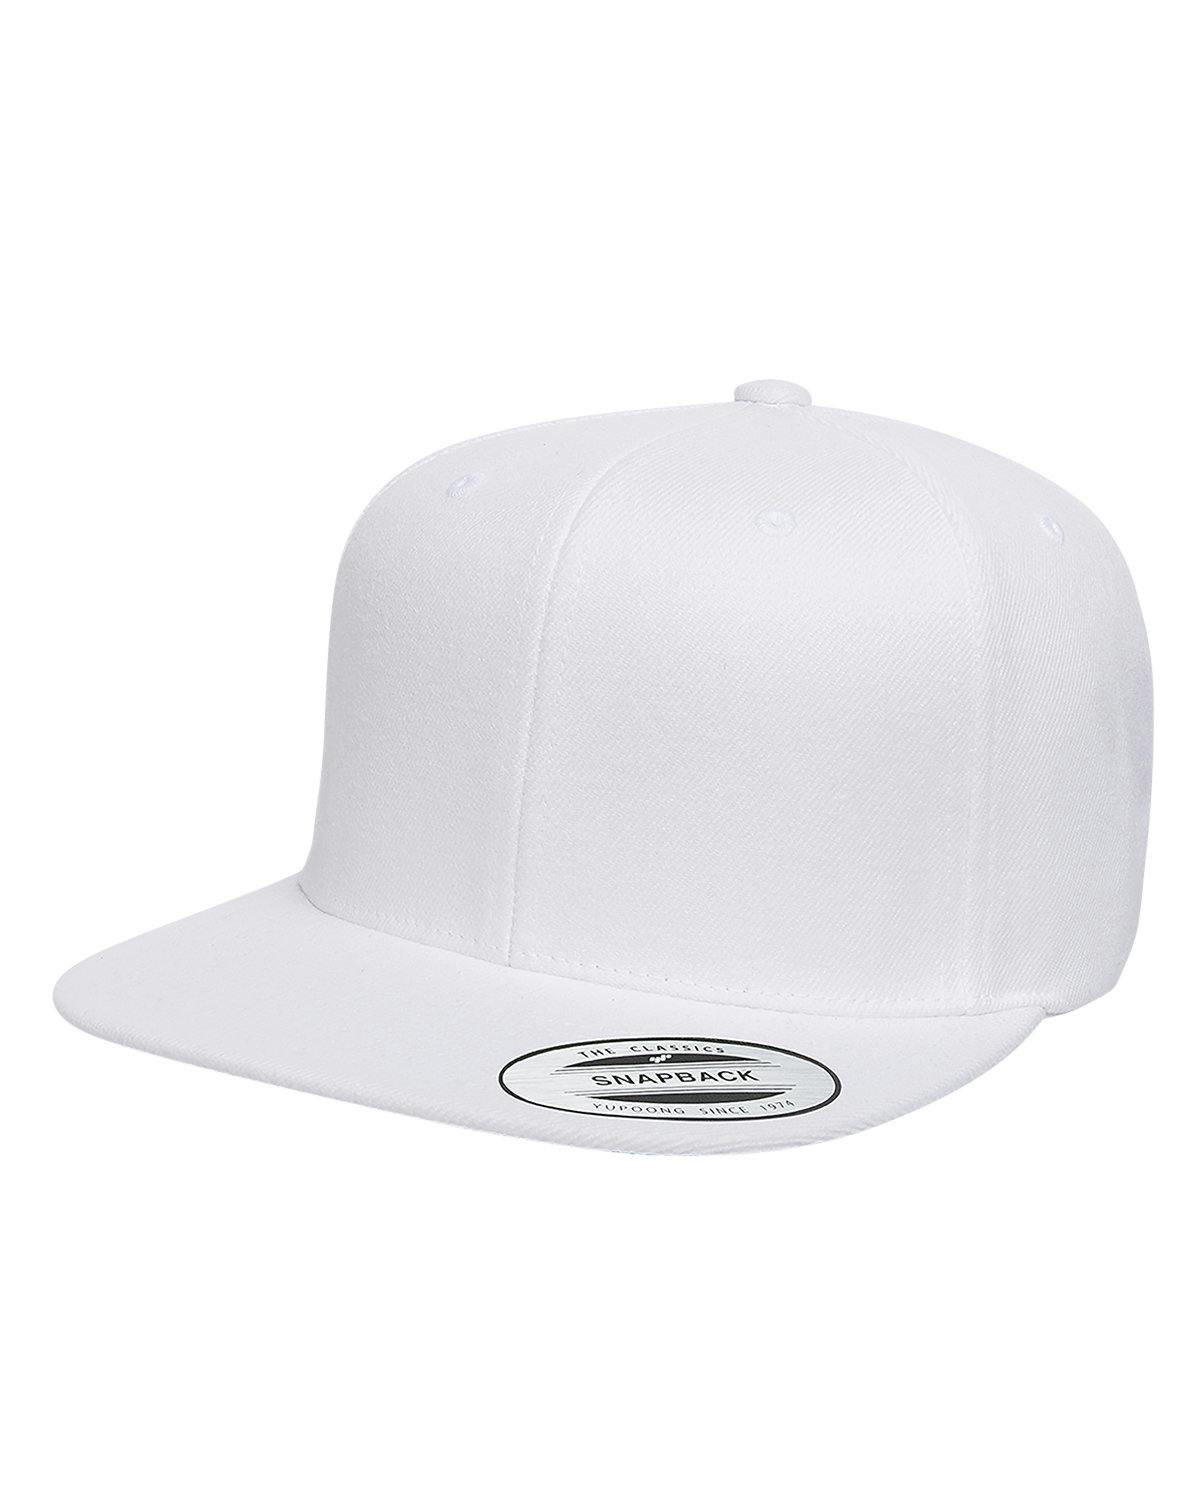 Image for Adult Structured Flat Visor Classic Snapback Cap